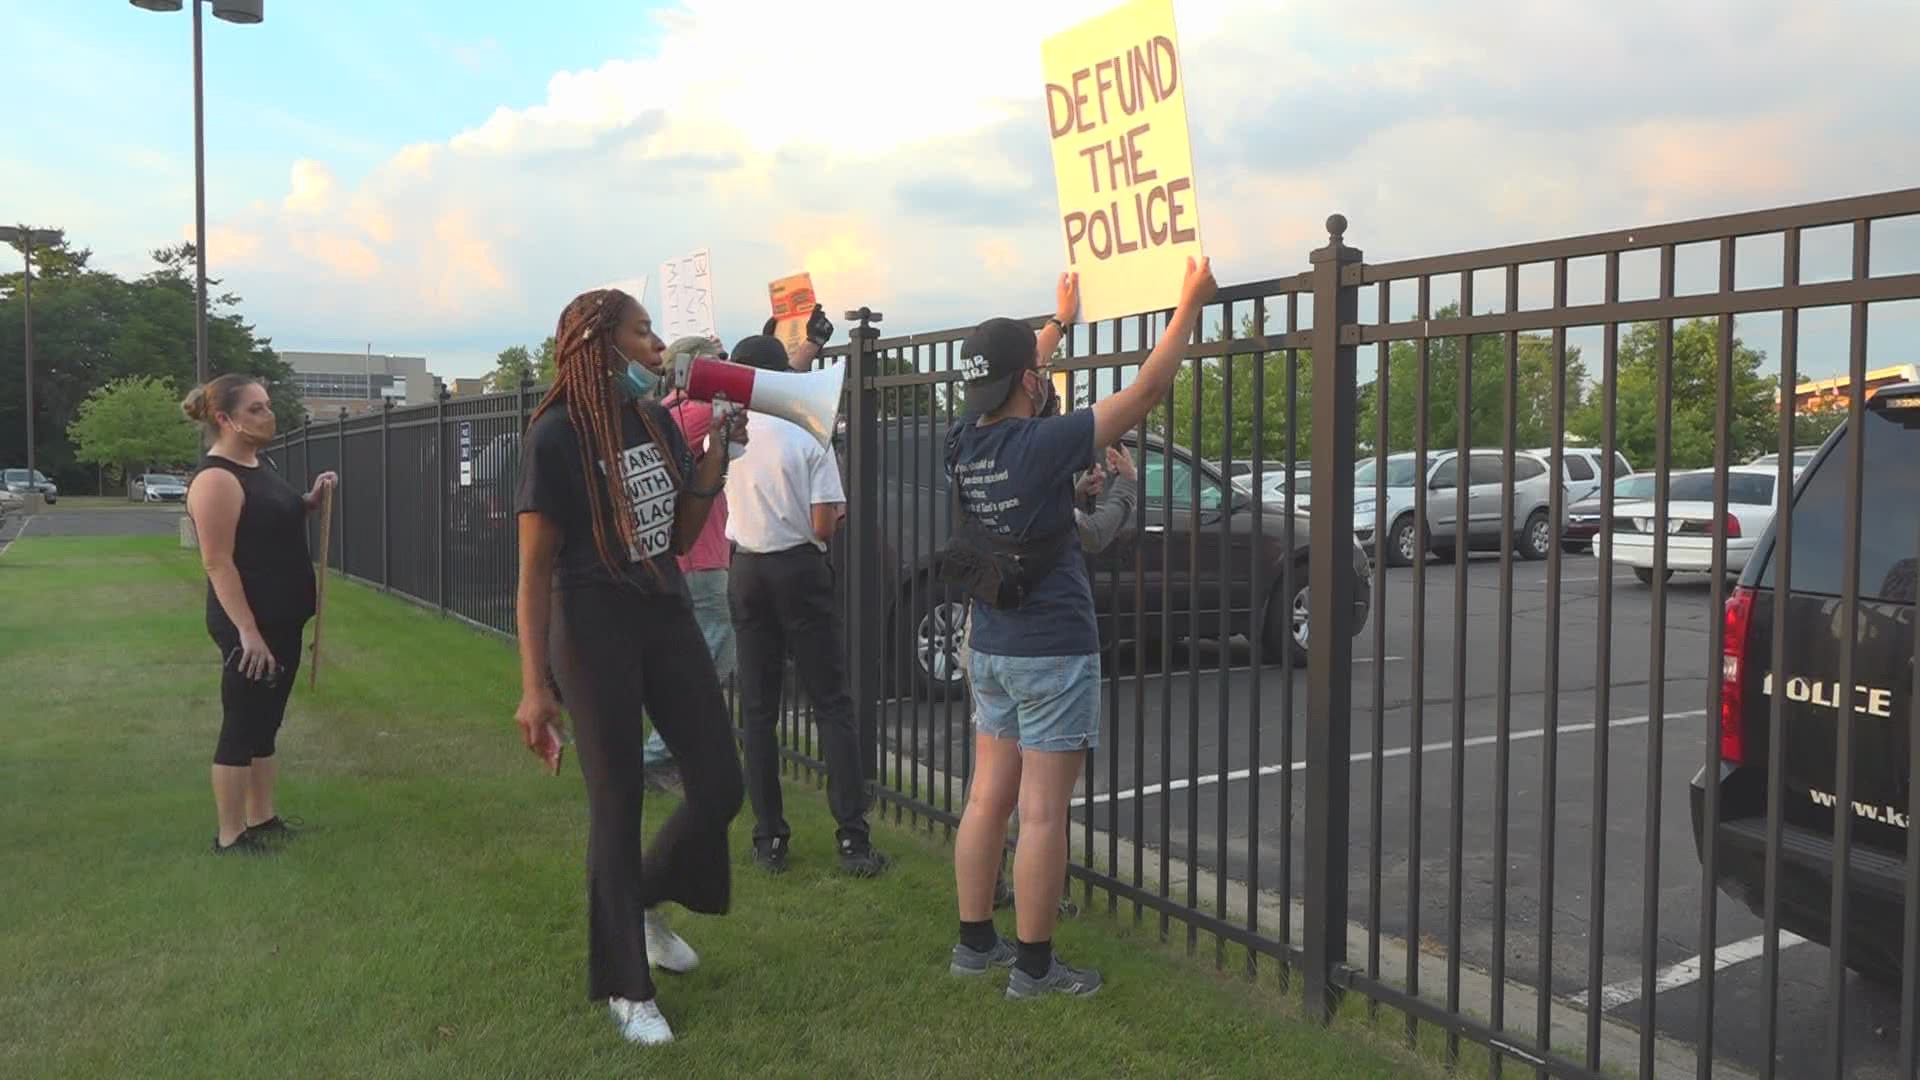 Demonstrators said they were demanding "accountability and answers for police actions."